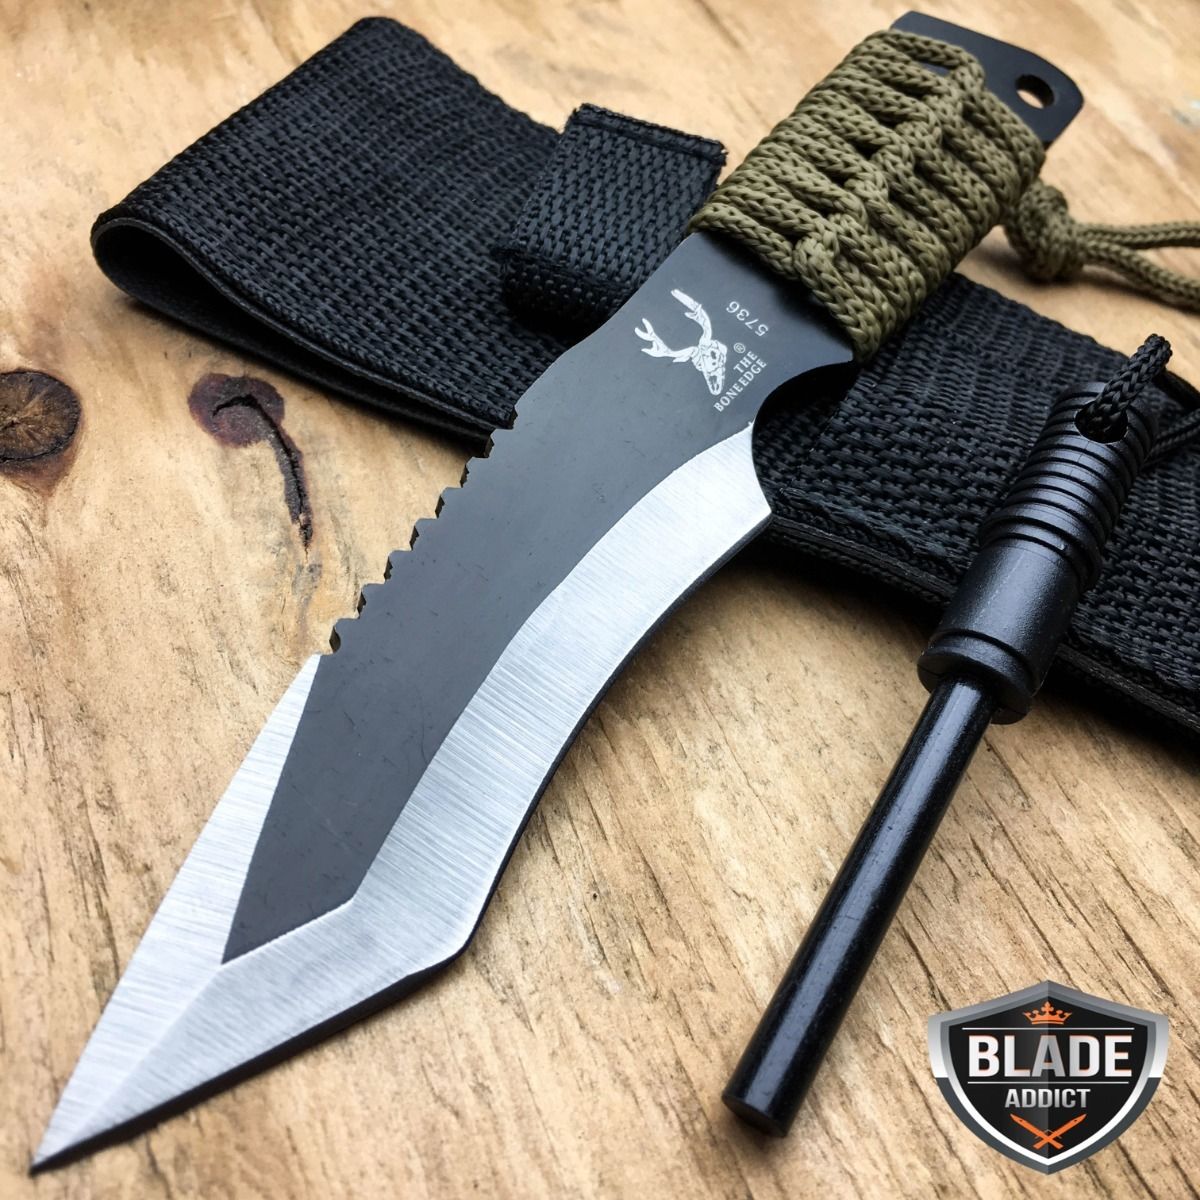 7" TACTICAL HUNTING SURVIVAL KNIFE w/ FIRESTARTER Combat Camping Bowie